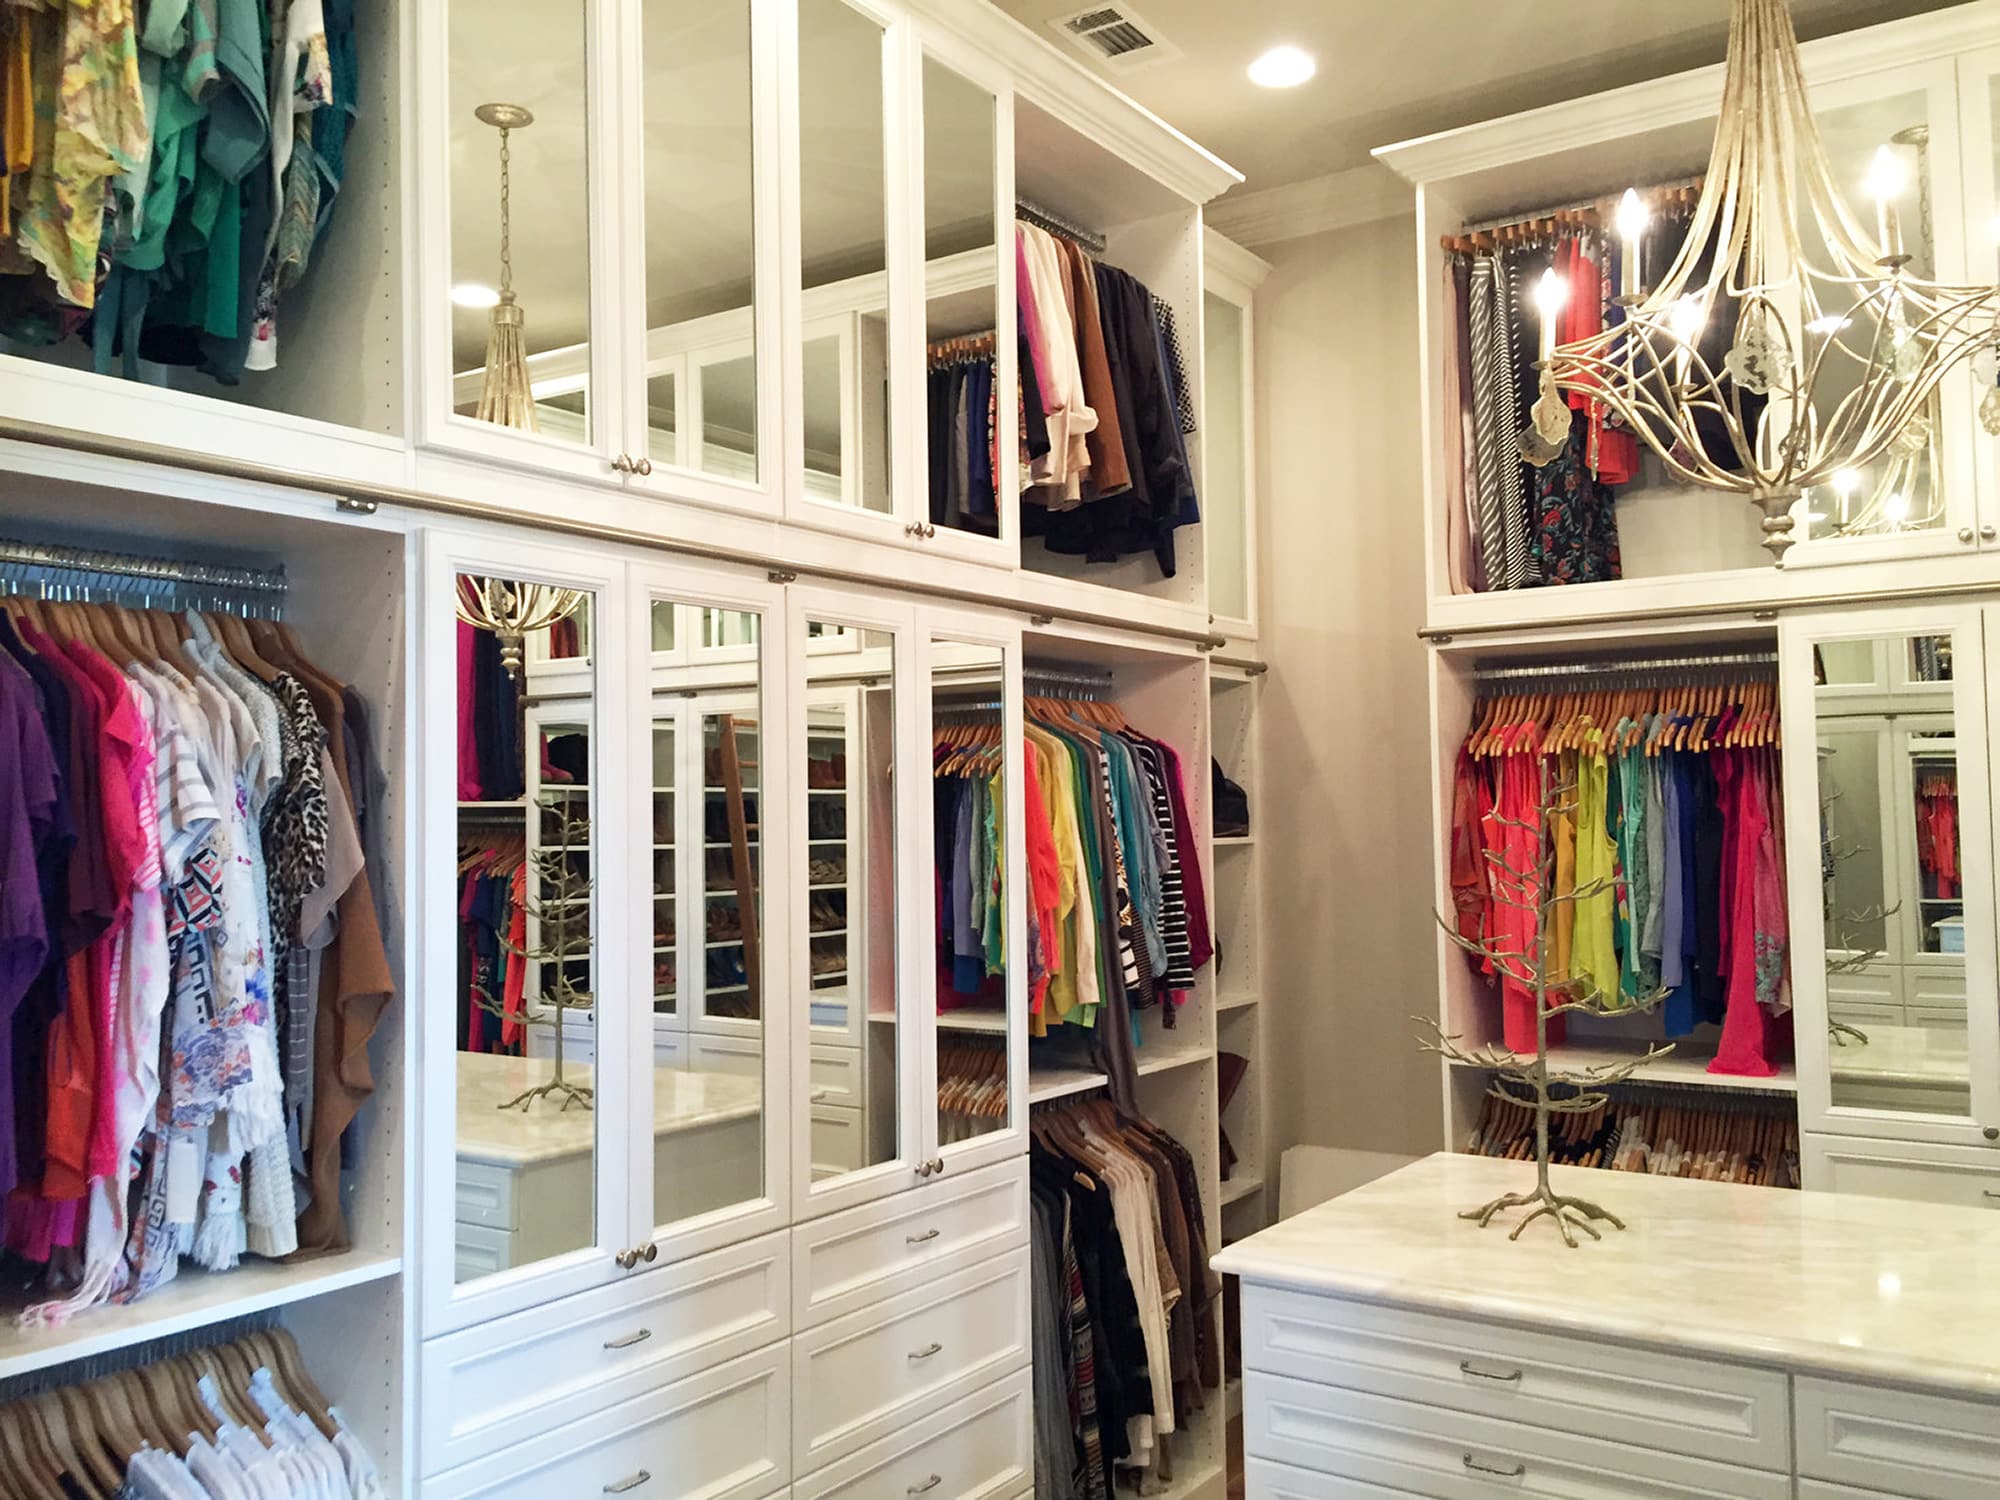 Closet with white cabinetry and clothing hanging